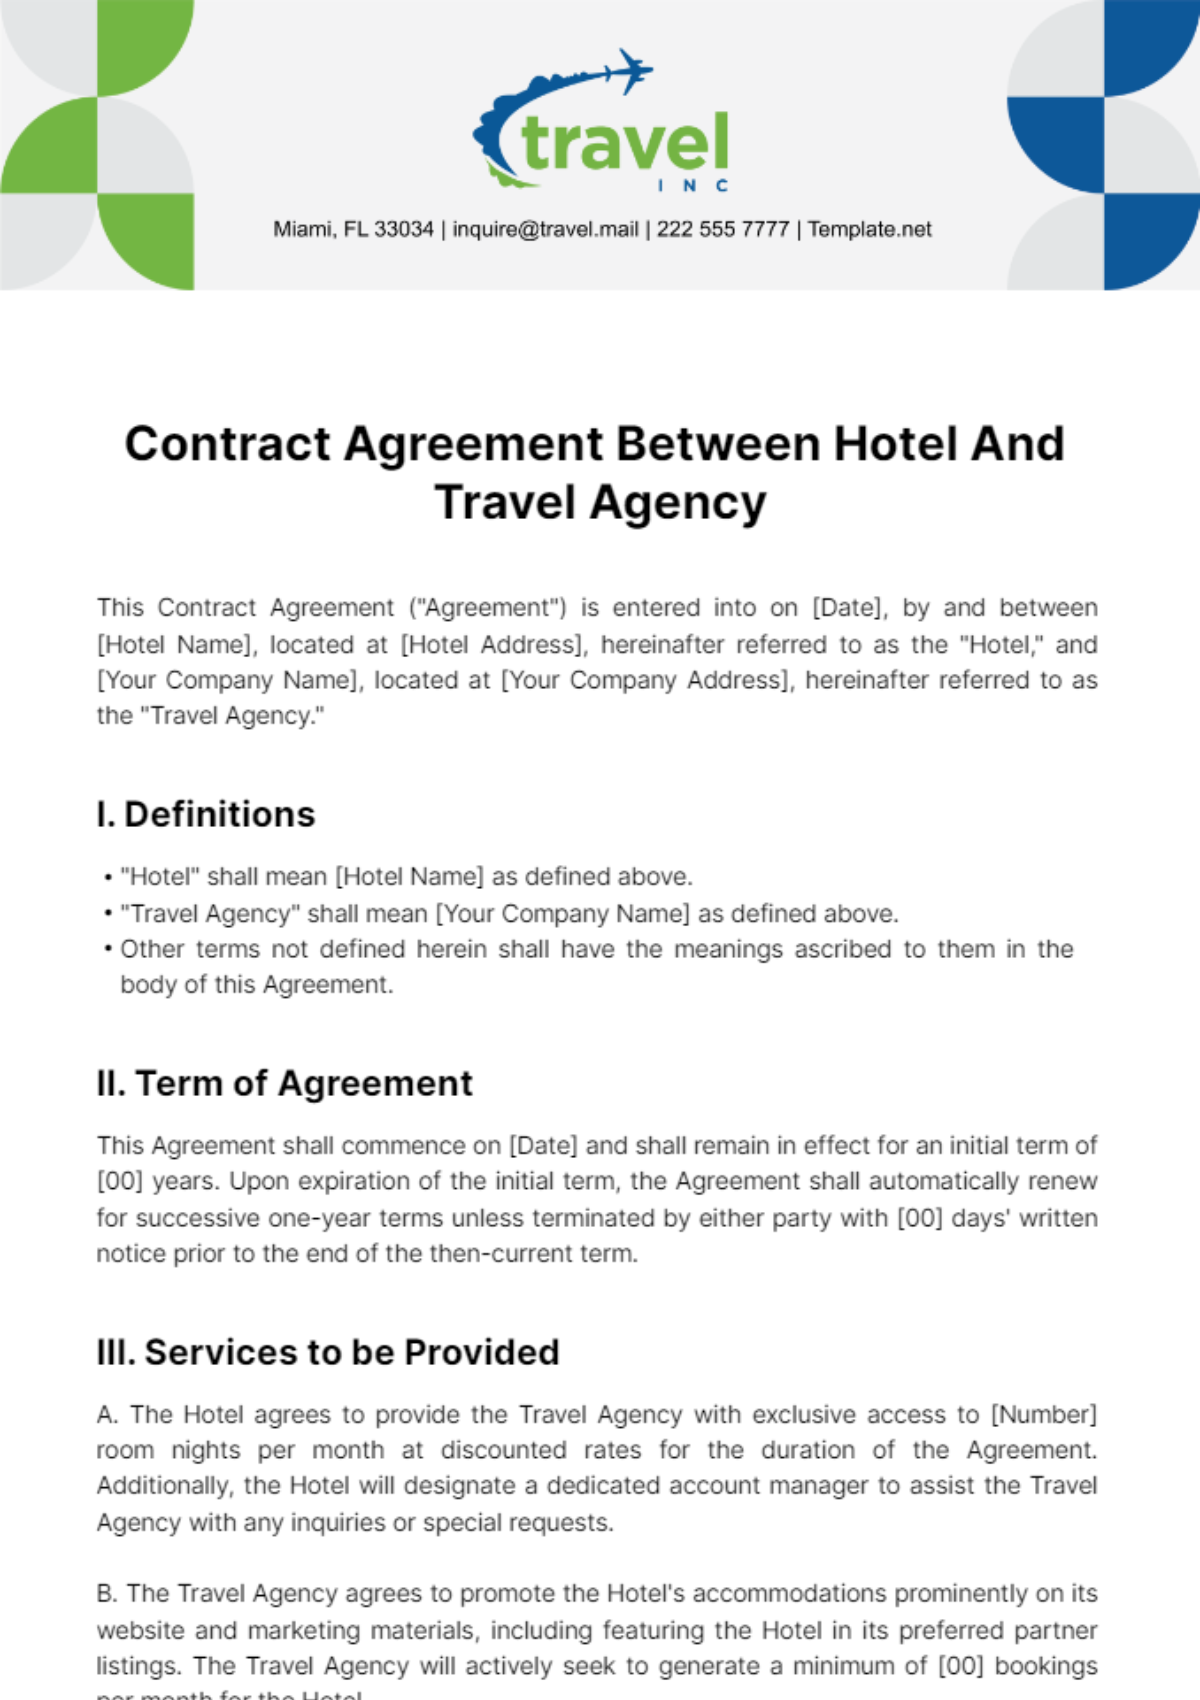 Contract Agreement Between Hotel And Travel Agency Template